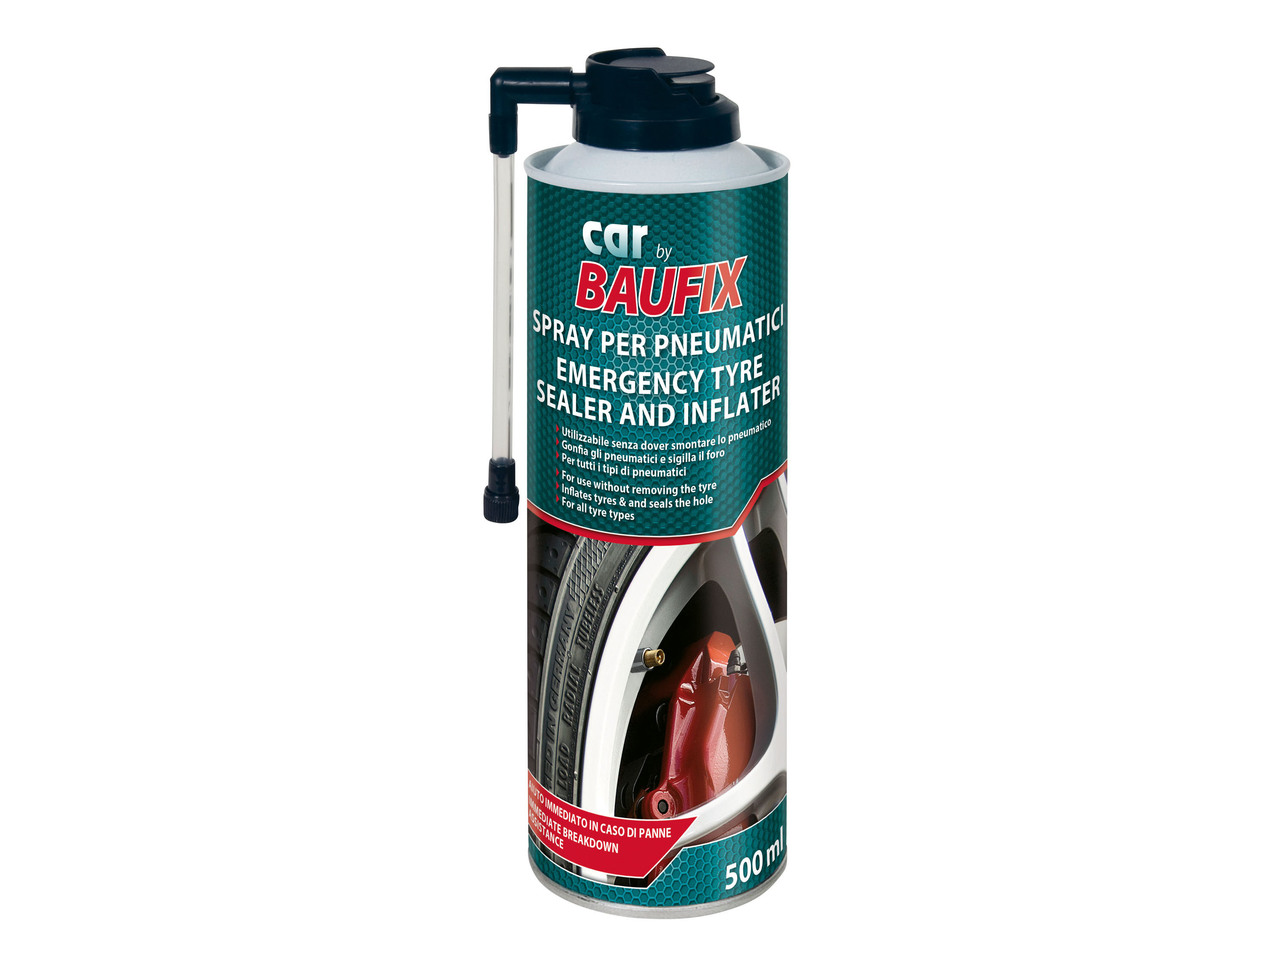 Emergency Tyre Sealer and Inflater 500ml